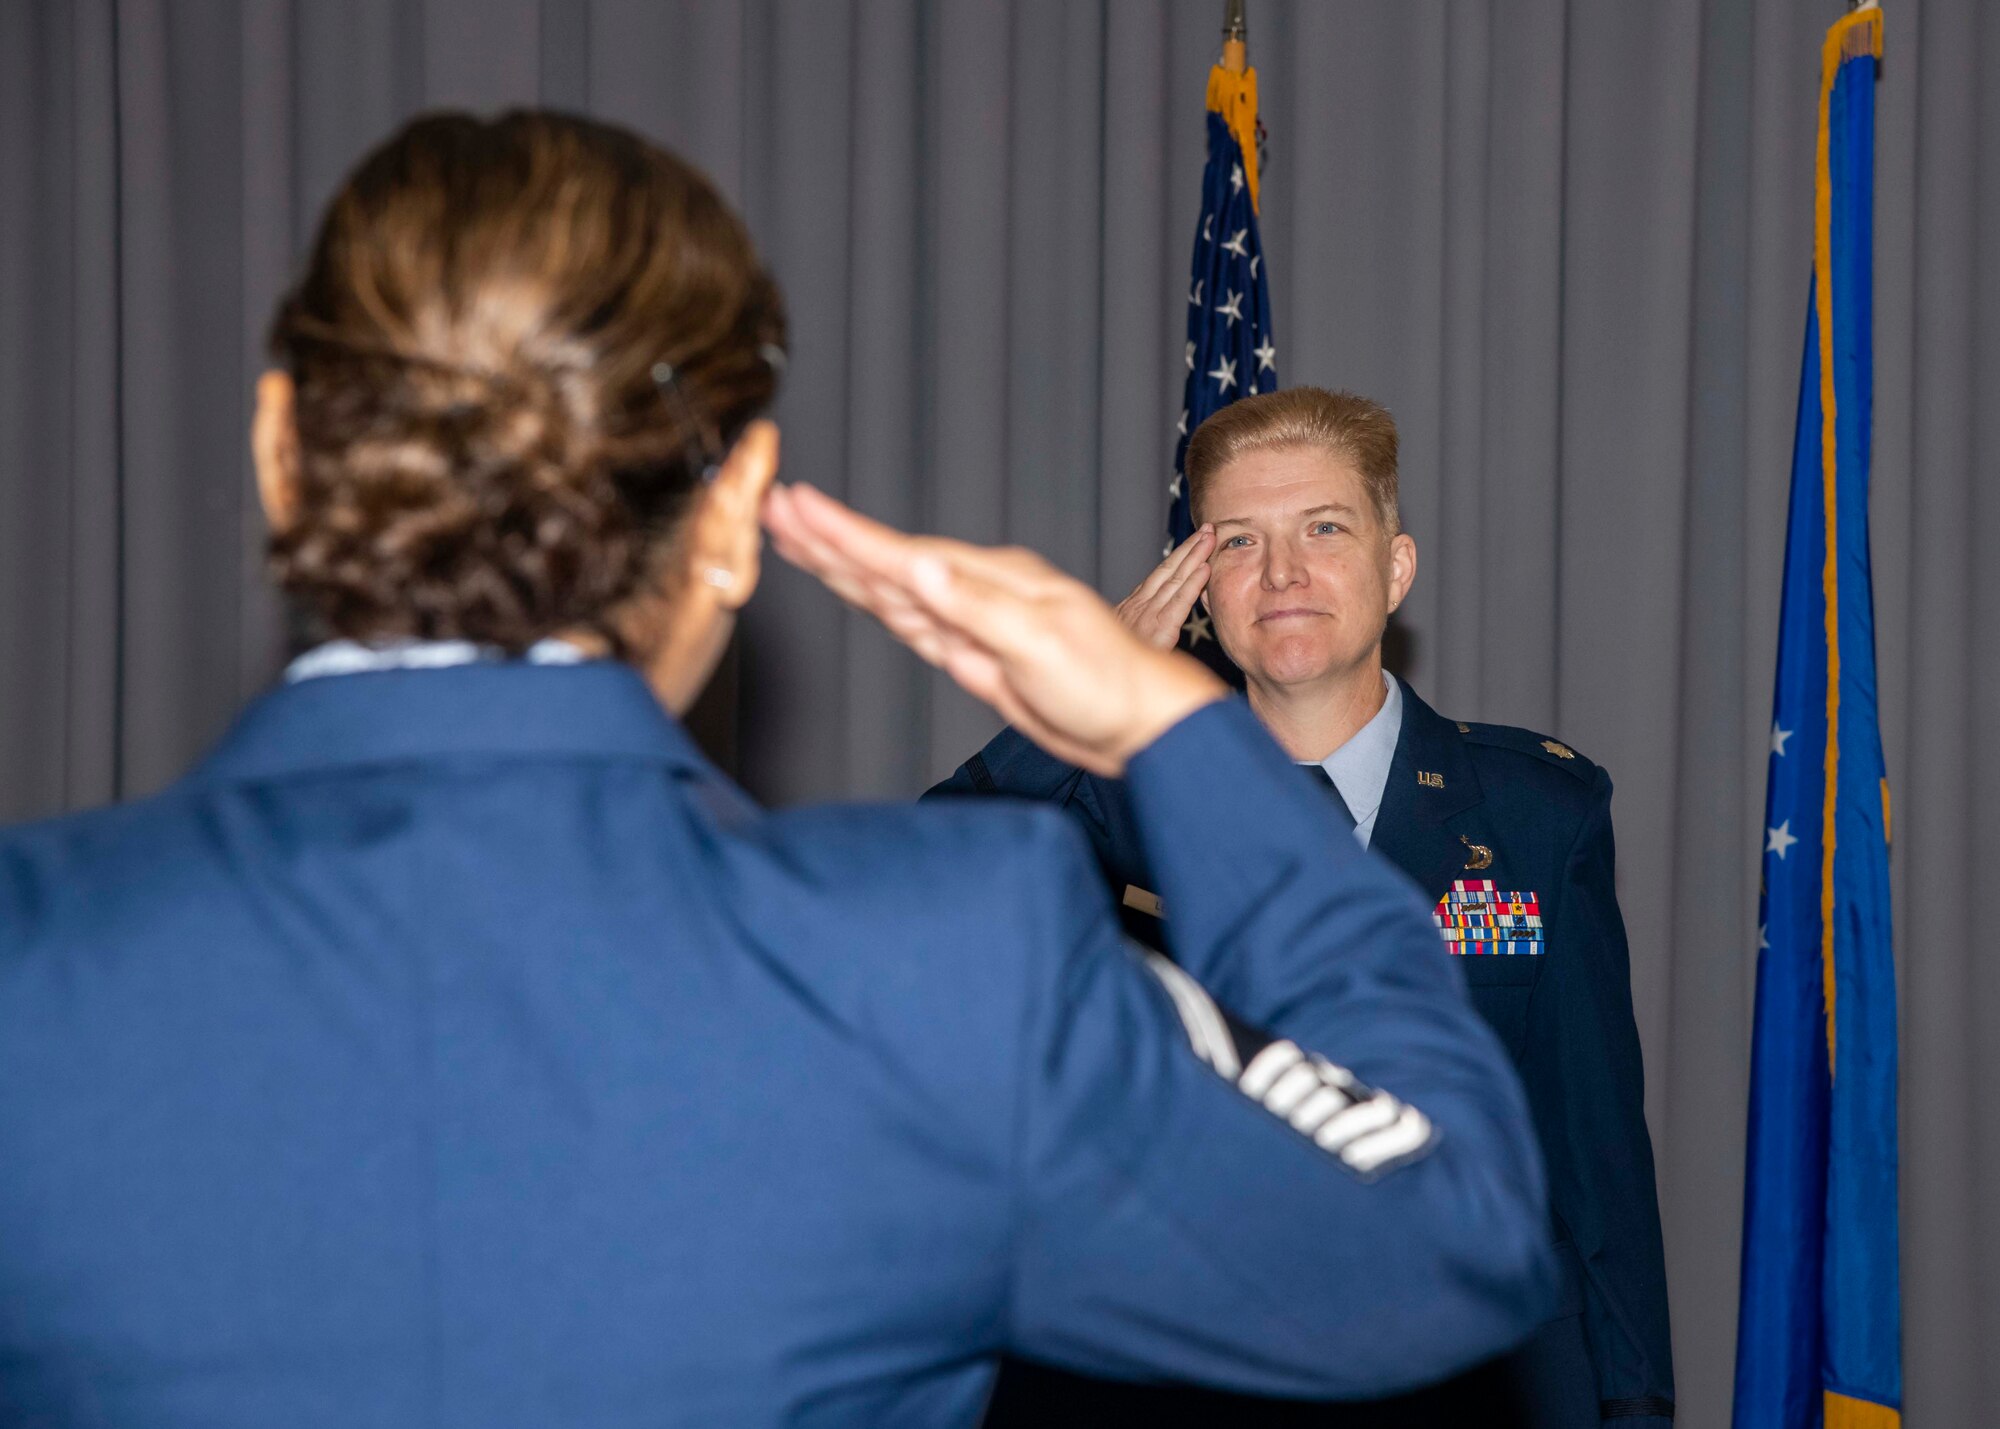 Lt. Col. Gretchen Lewis, incoming 436th Comptroller Squadron commander, returns a first salute during a change of command ceremony on Dover Air Force Base, Delaware, June 28, 2021. The ceremony saw Maj. Kevin Byram relinquish command to Lewis. (U.S. Air Force photo by Airman 1st Class Stephani Barge)